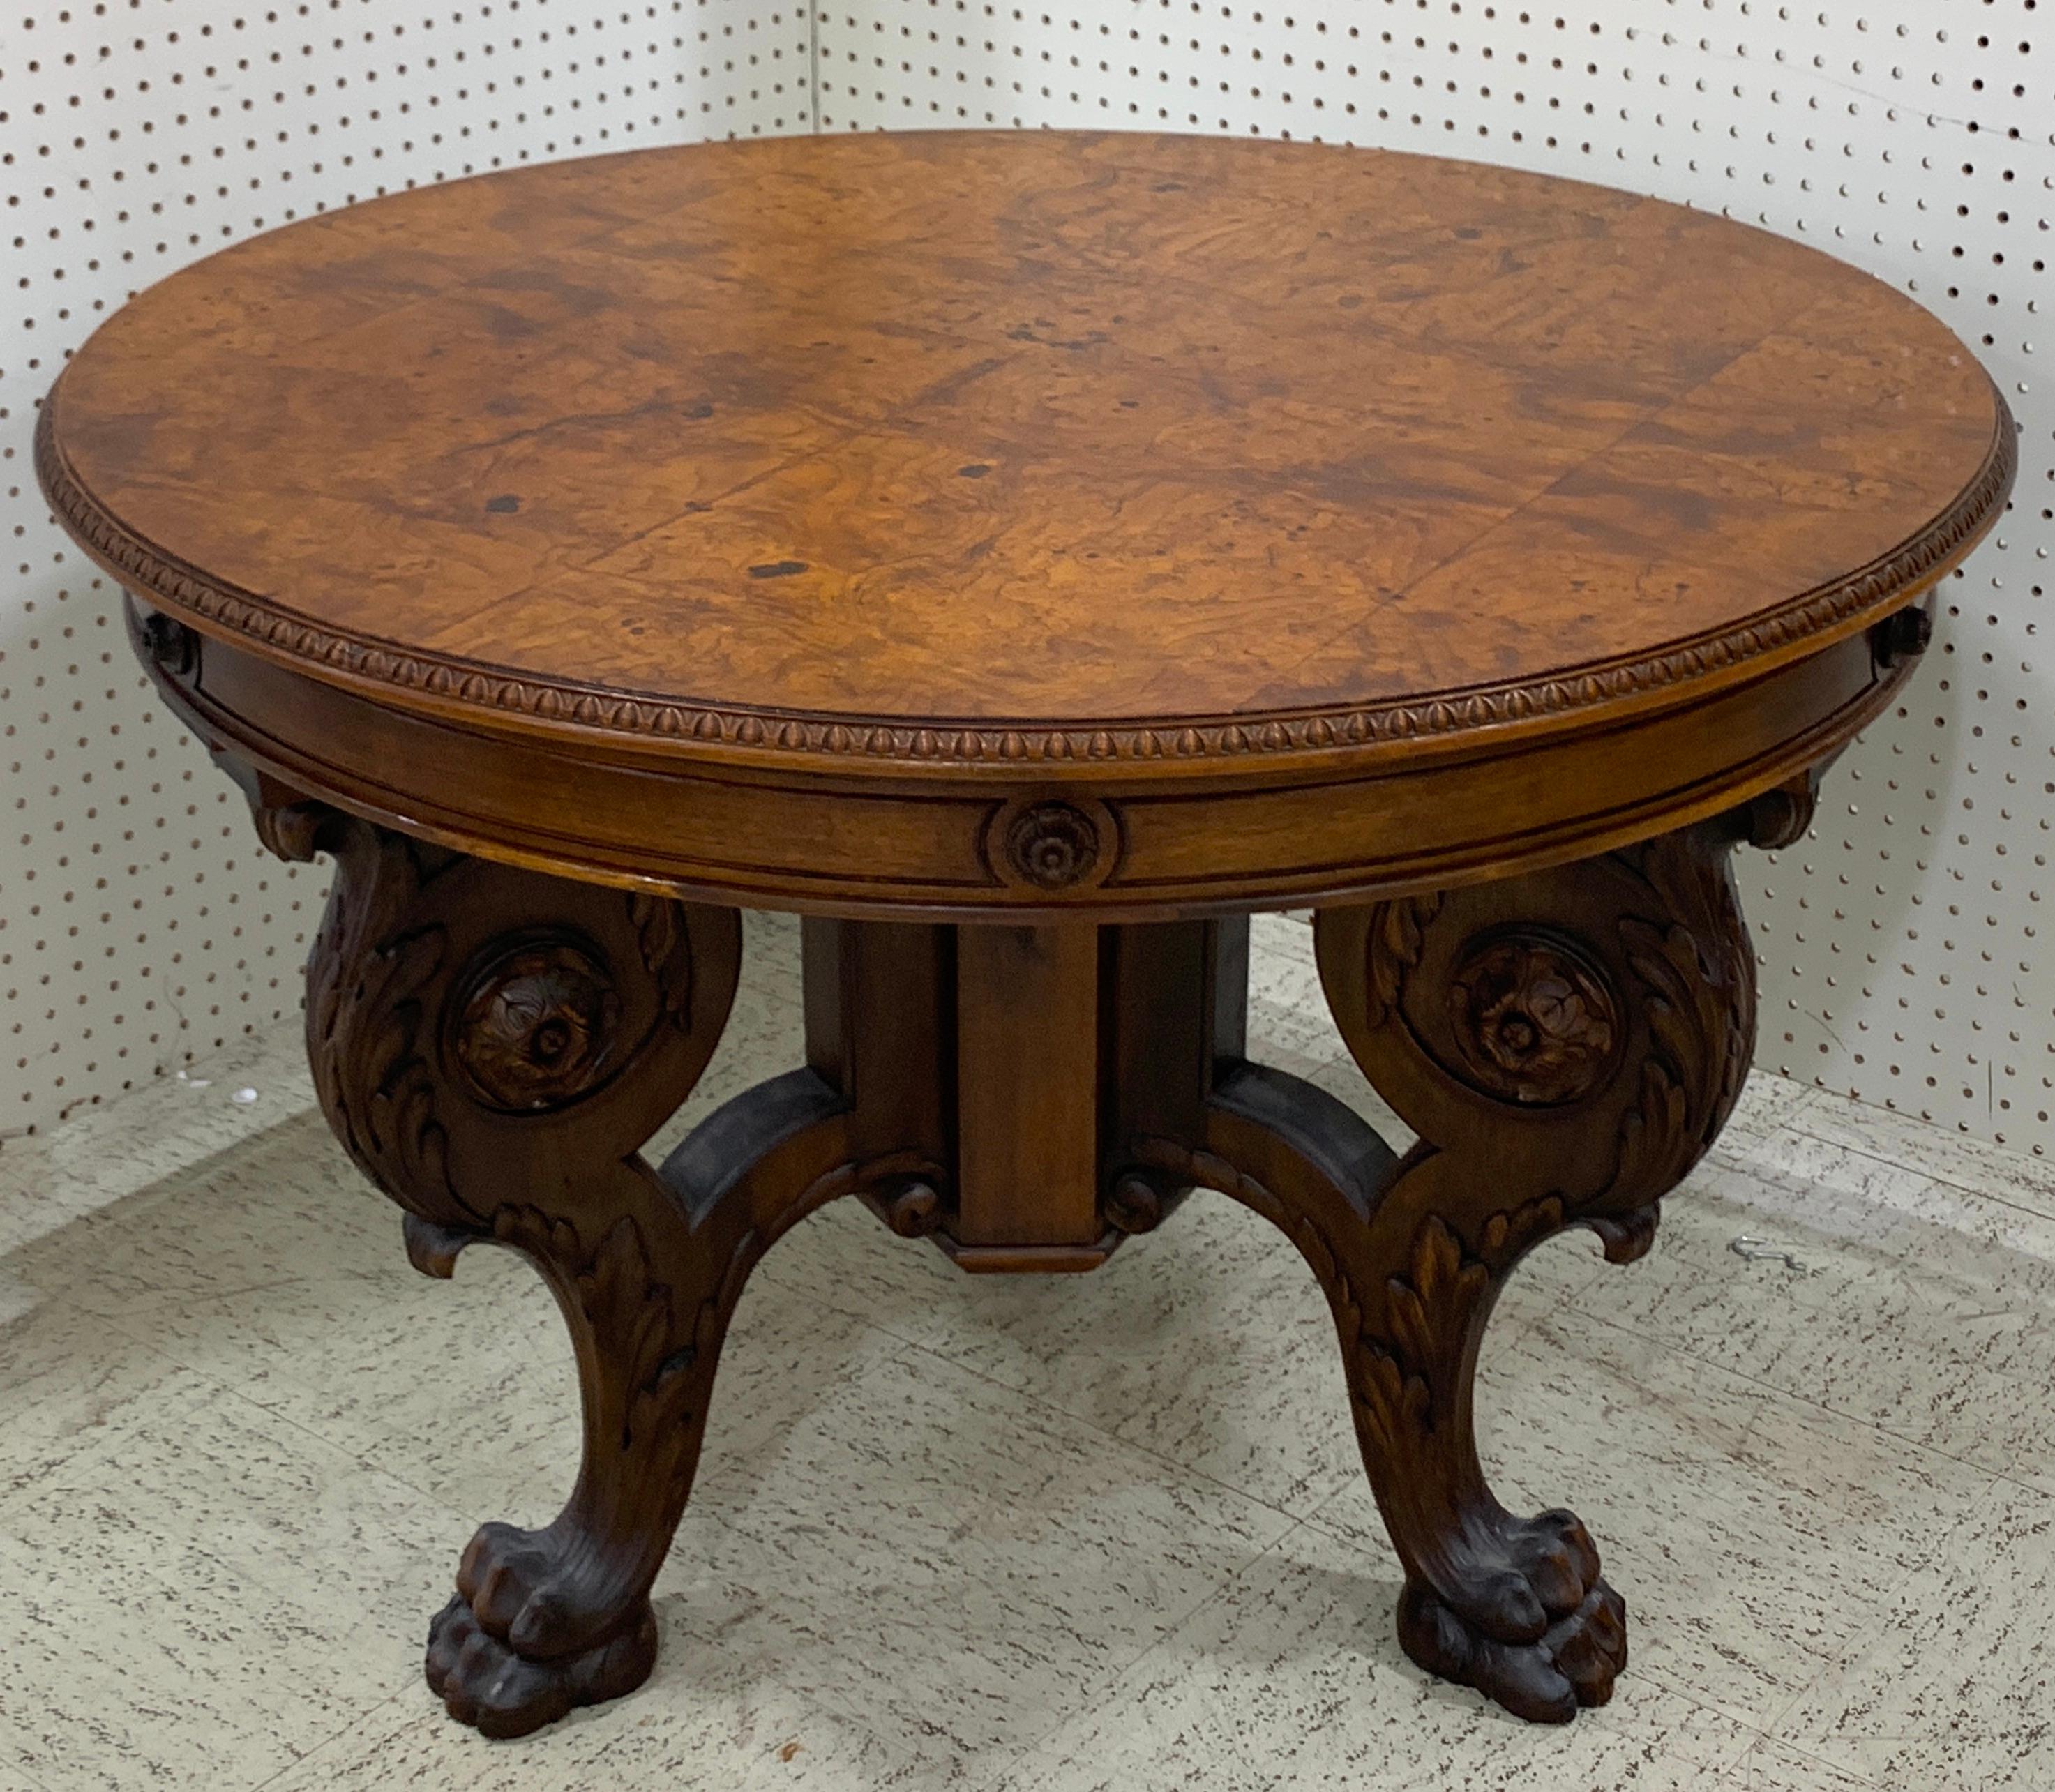 Italian Renaissance style walnut and burl round table, beautiful bookmatched top with egg and dart edge, raised on a strong, finely carved acanthus medallion tripartite paw foot base.